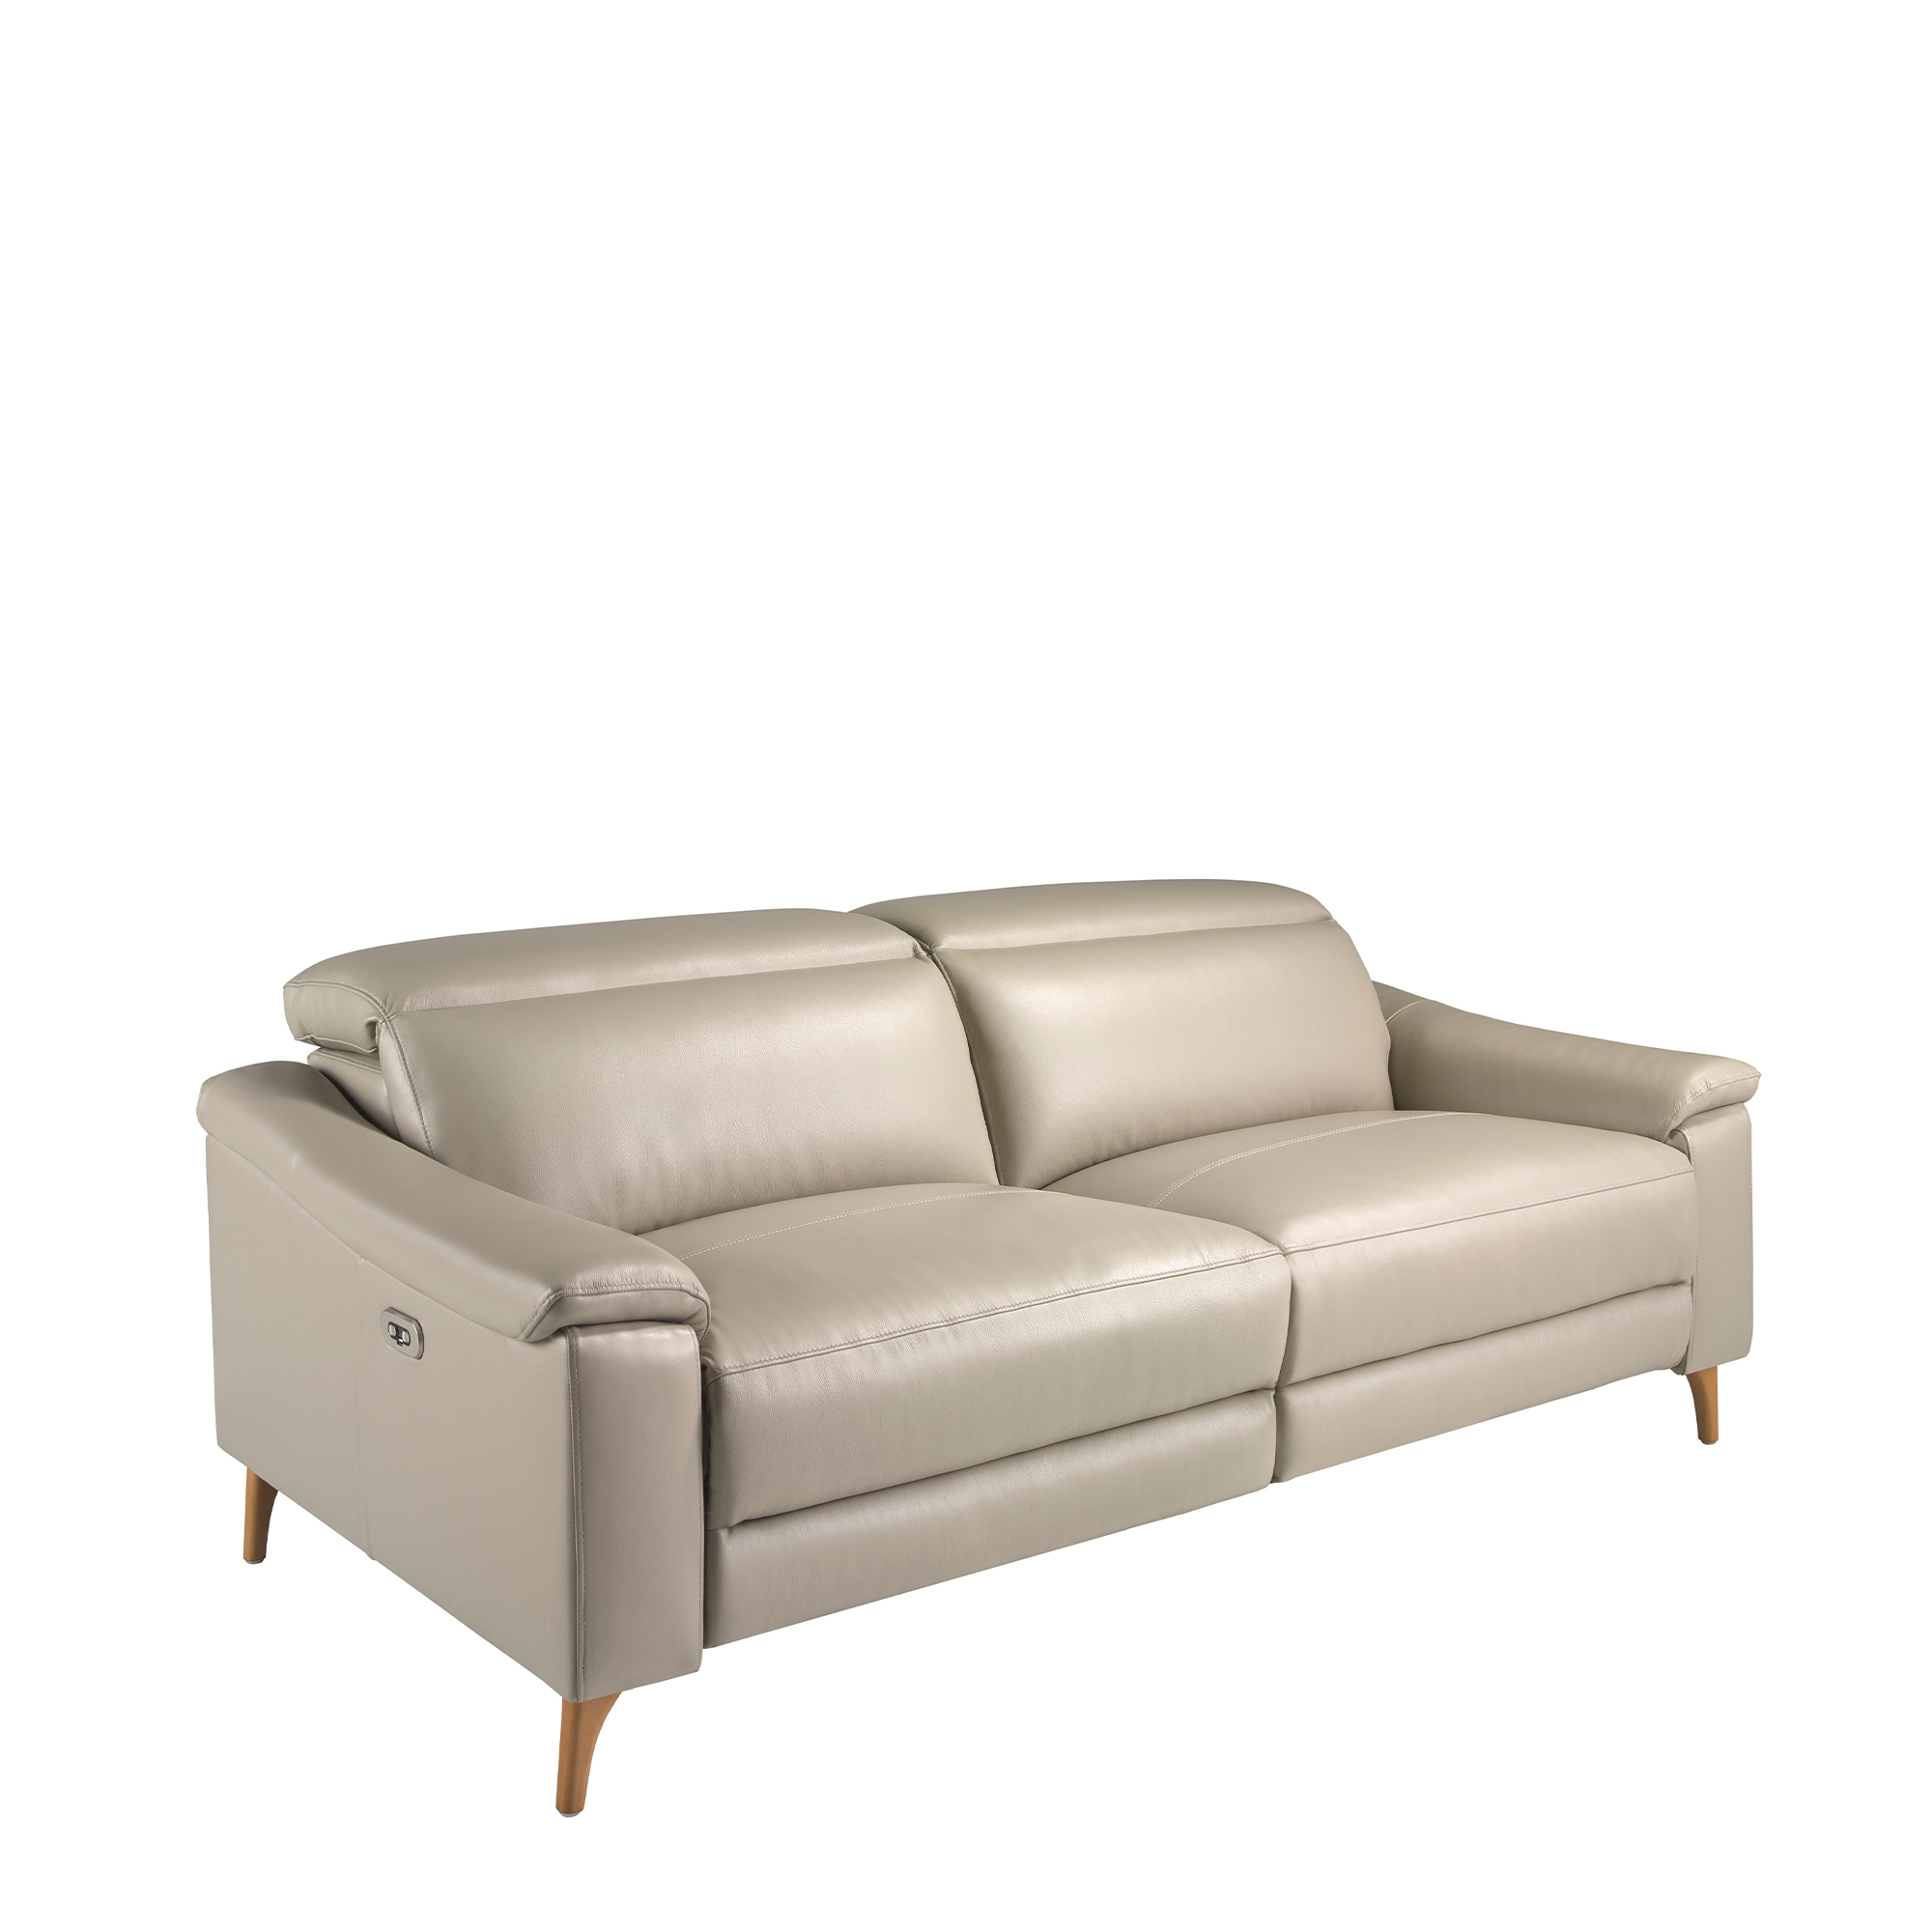 3 seater relax sofa in taupe grey leather